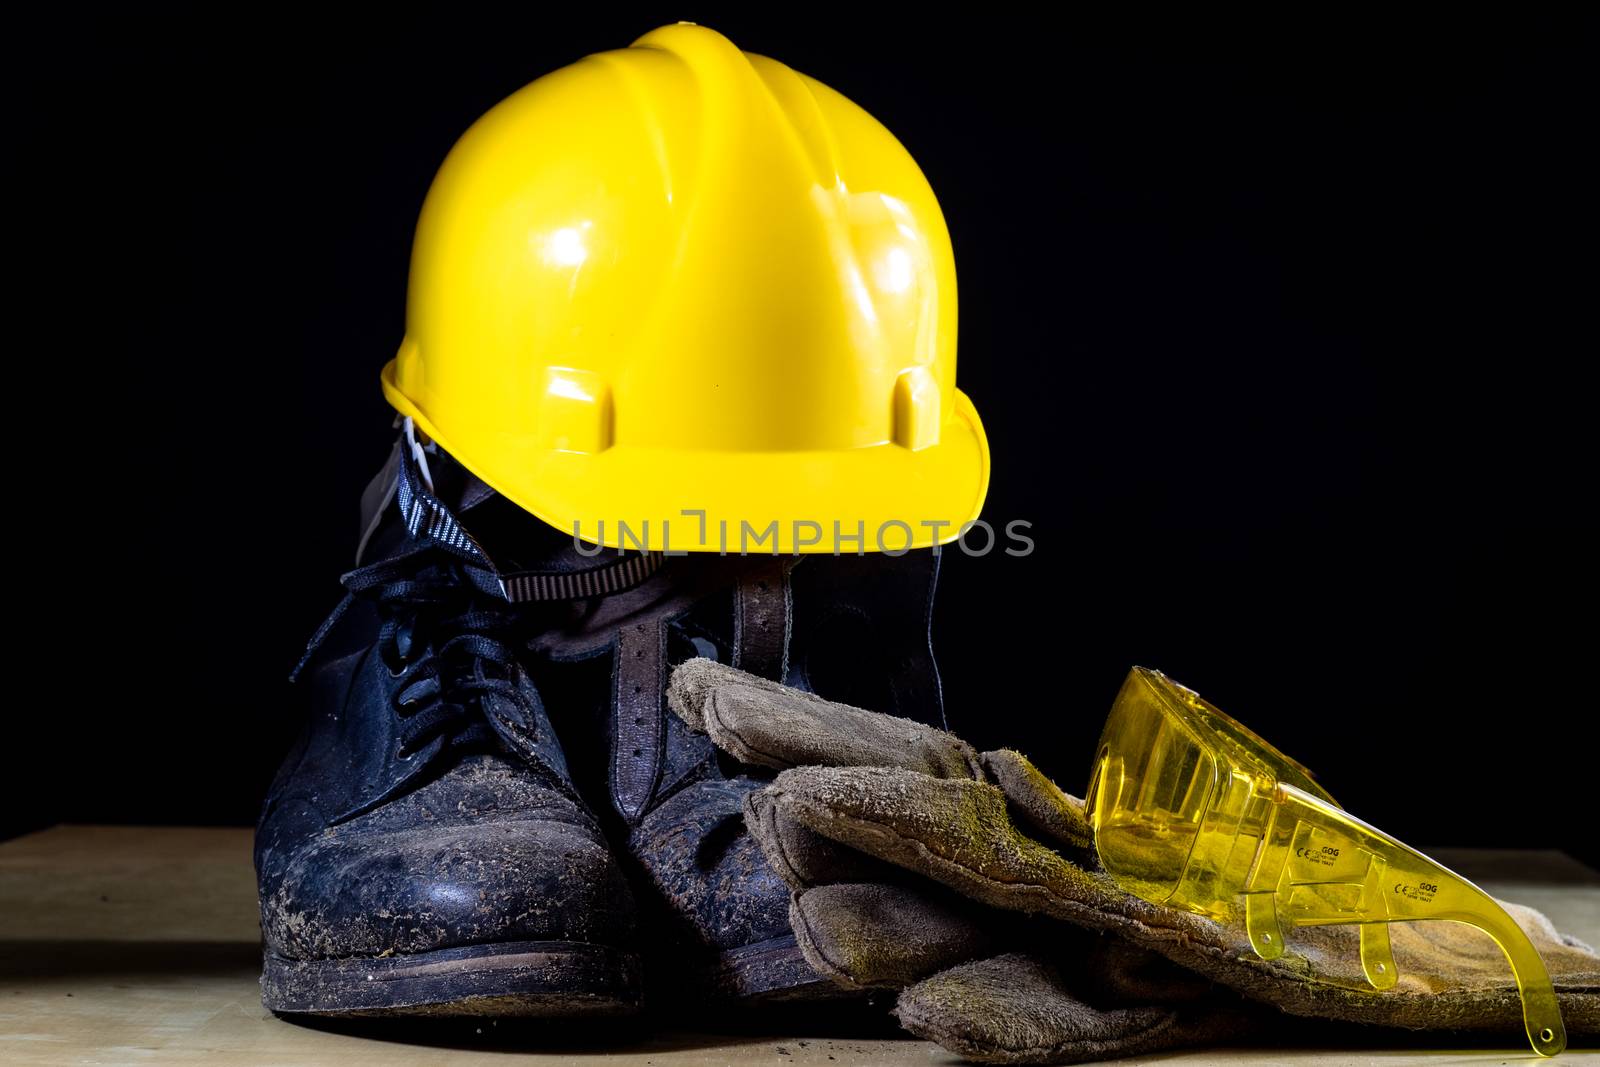 Workwear for a construction worker. Helmet, gloves, shoes and sunglasses on a wooden table. Black background.